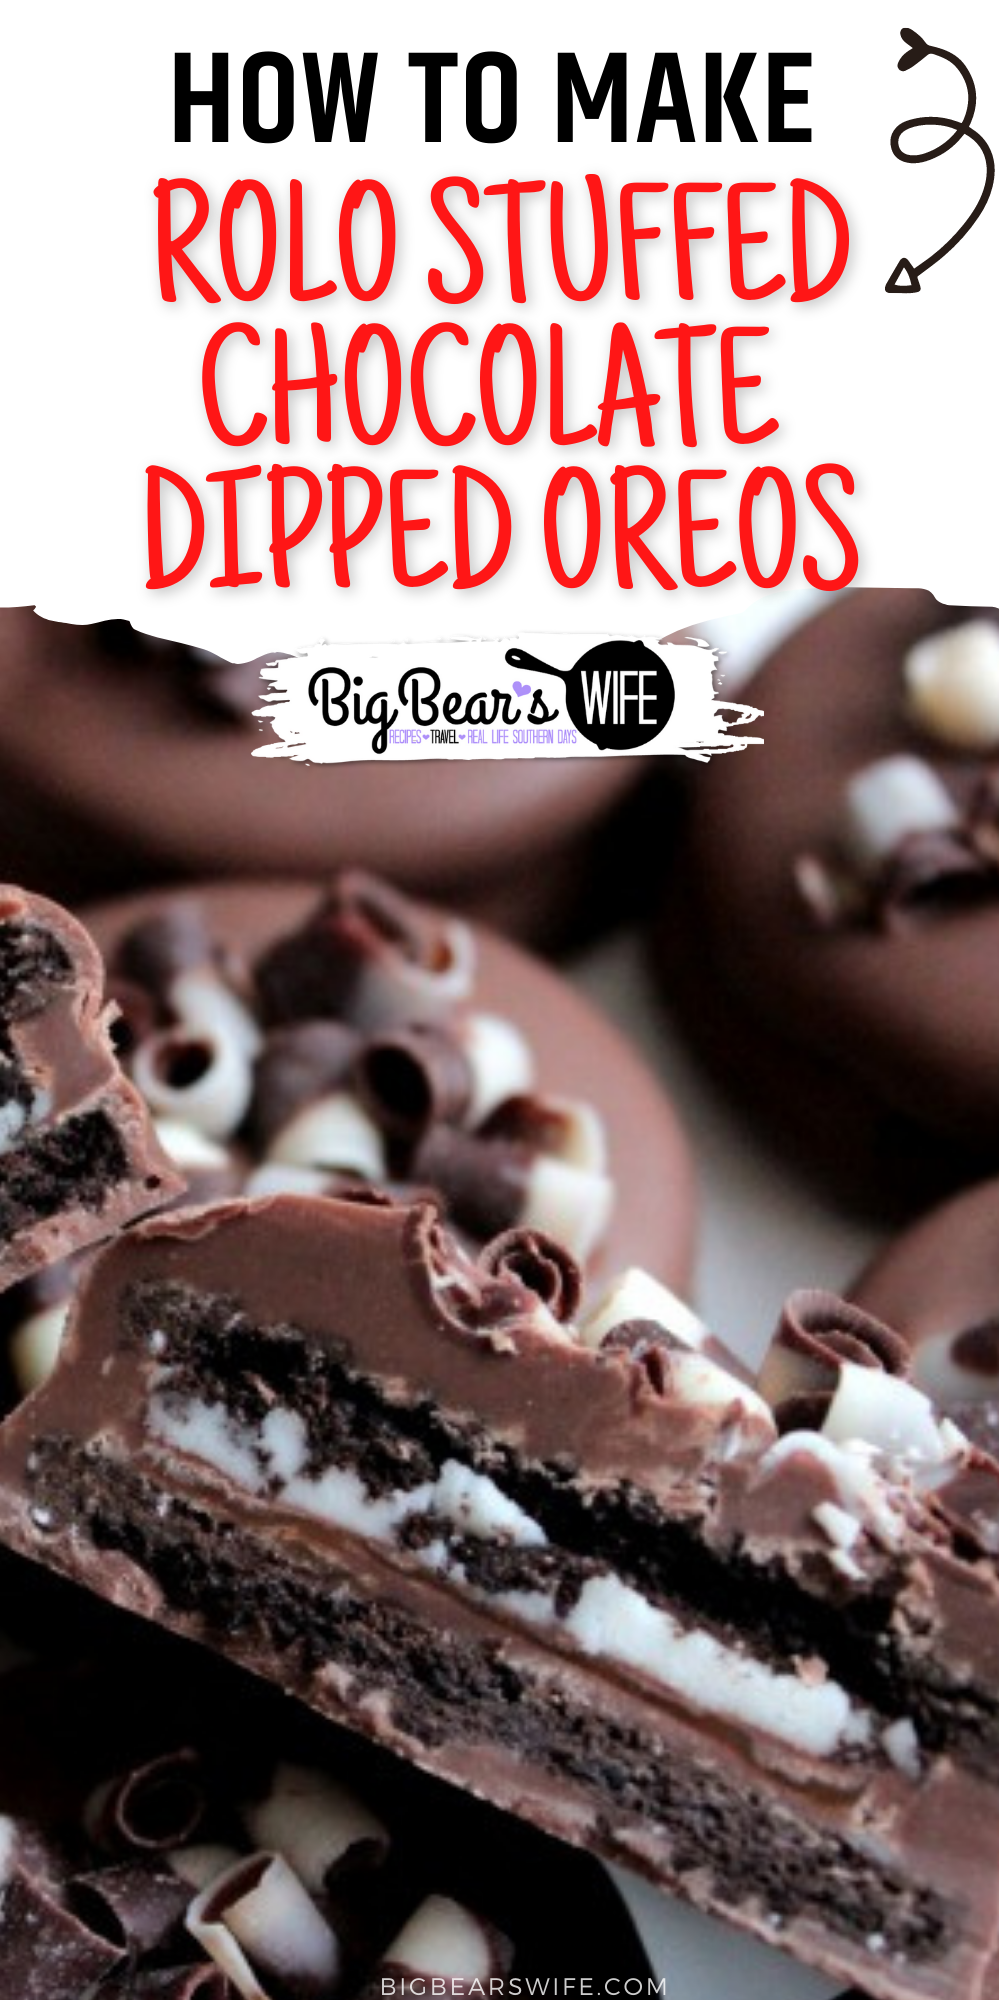 These super easy Rolo Stuffed Chocolate Dipped Oreos are perfect for holiday parties, homemade gifts or just as a sweet treat to have around the house!  via @bigbearswife